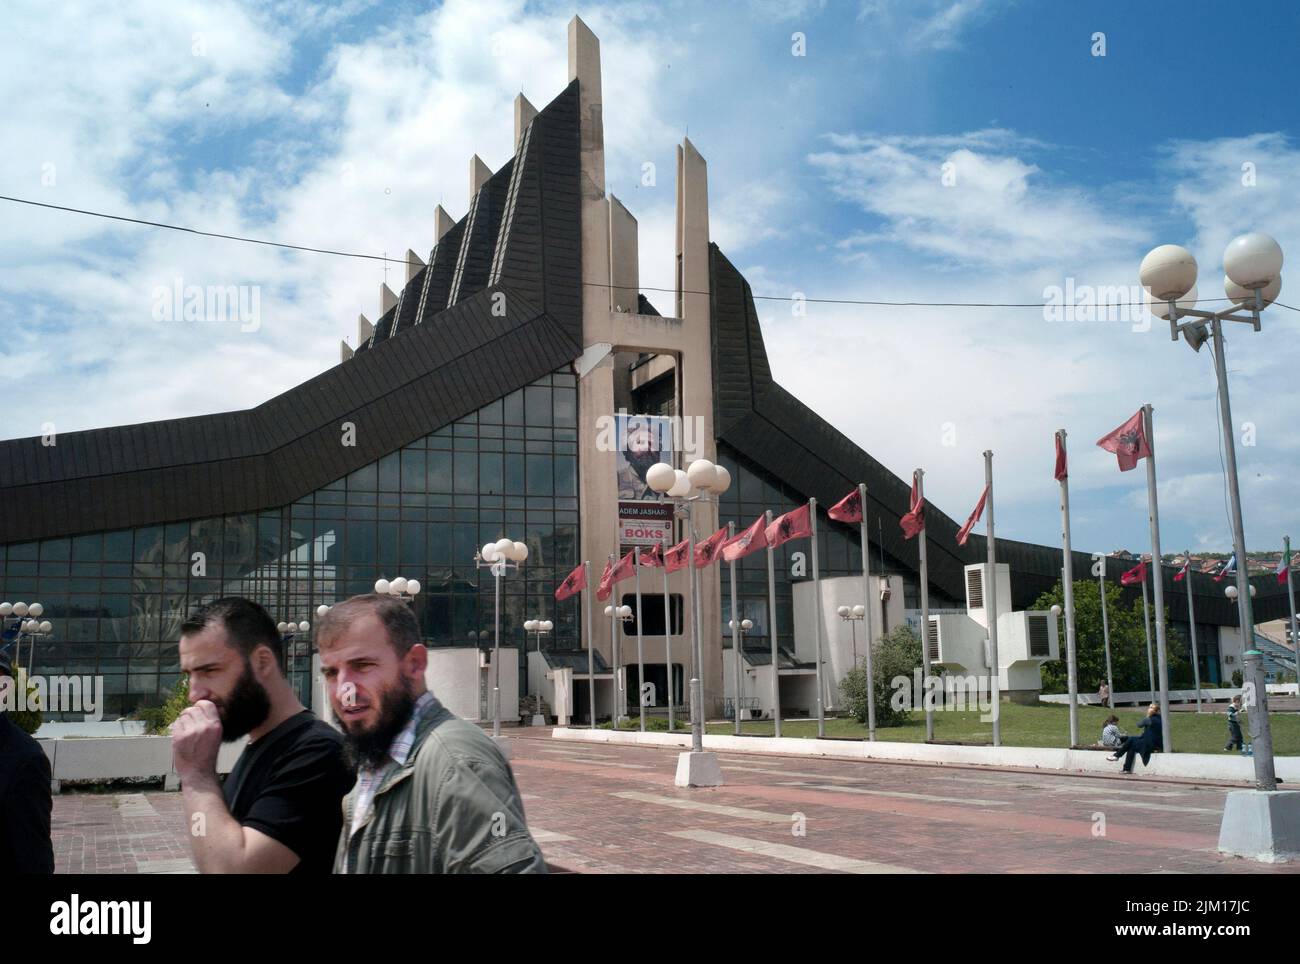 Pristina, Kosovo. posters and flags celebrate a freedom fighter from the Kosovo Liberation Army, outside the Yugoslav-era sports centre. Stock Photo